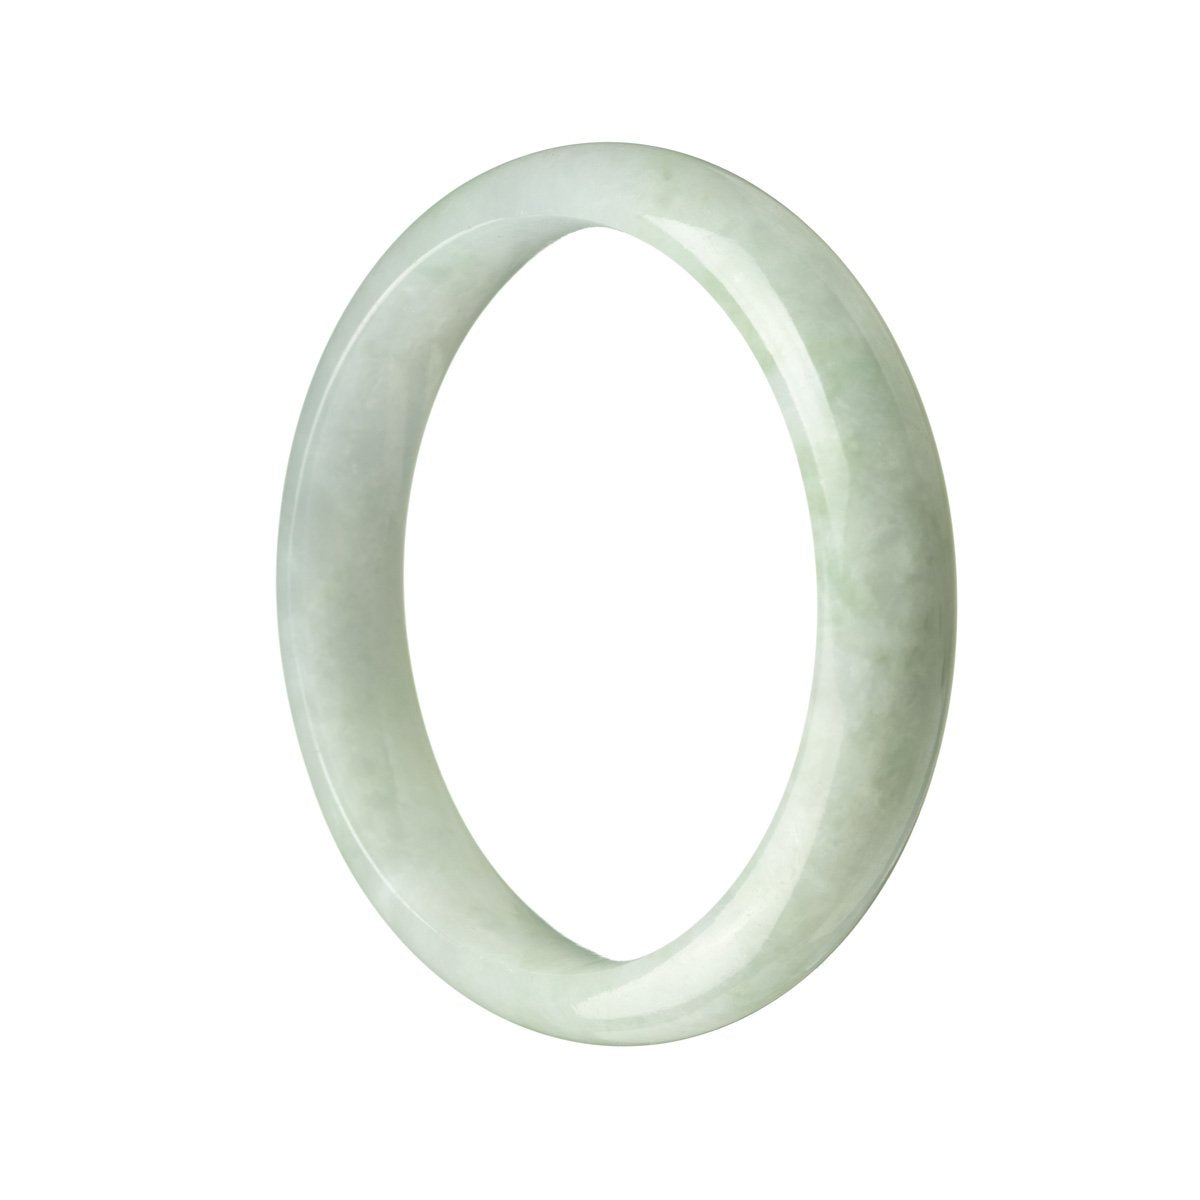 A pale green lavender jade bangle with a 57mm half moon shape.